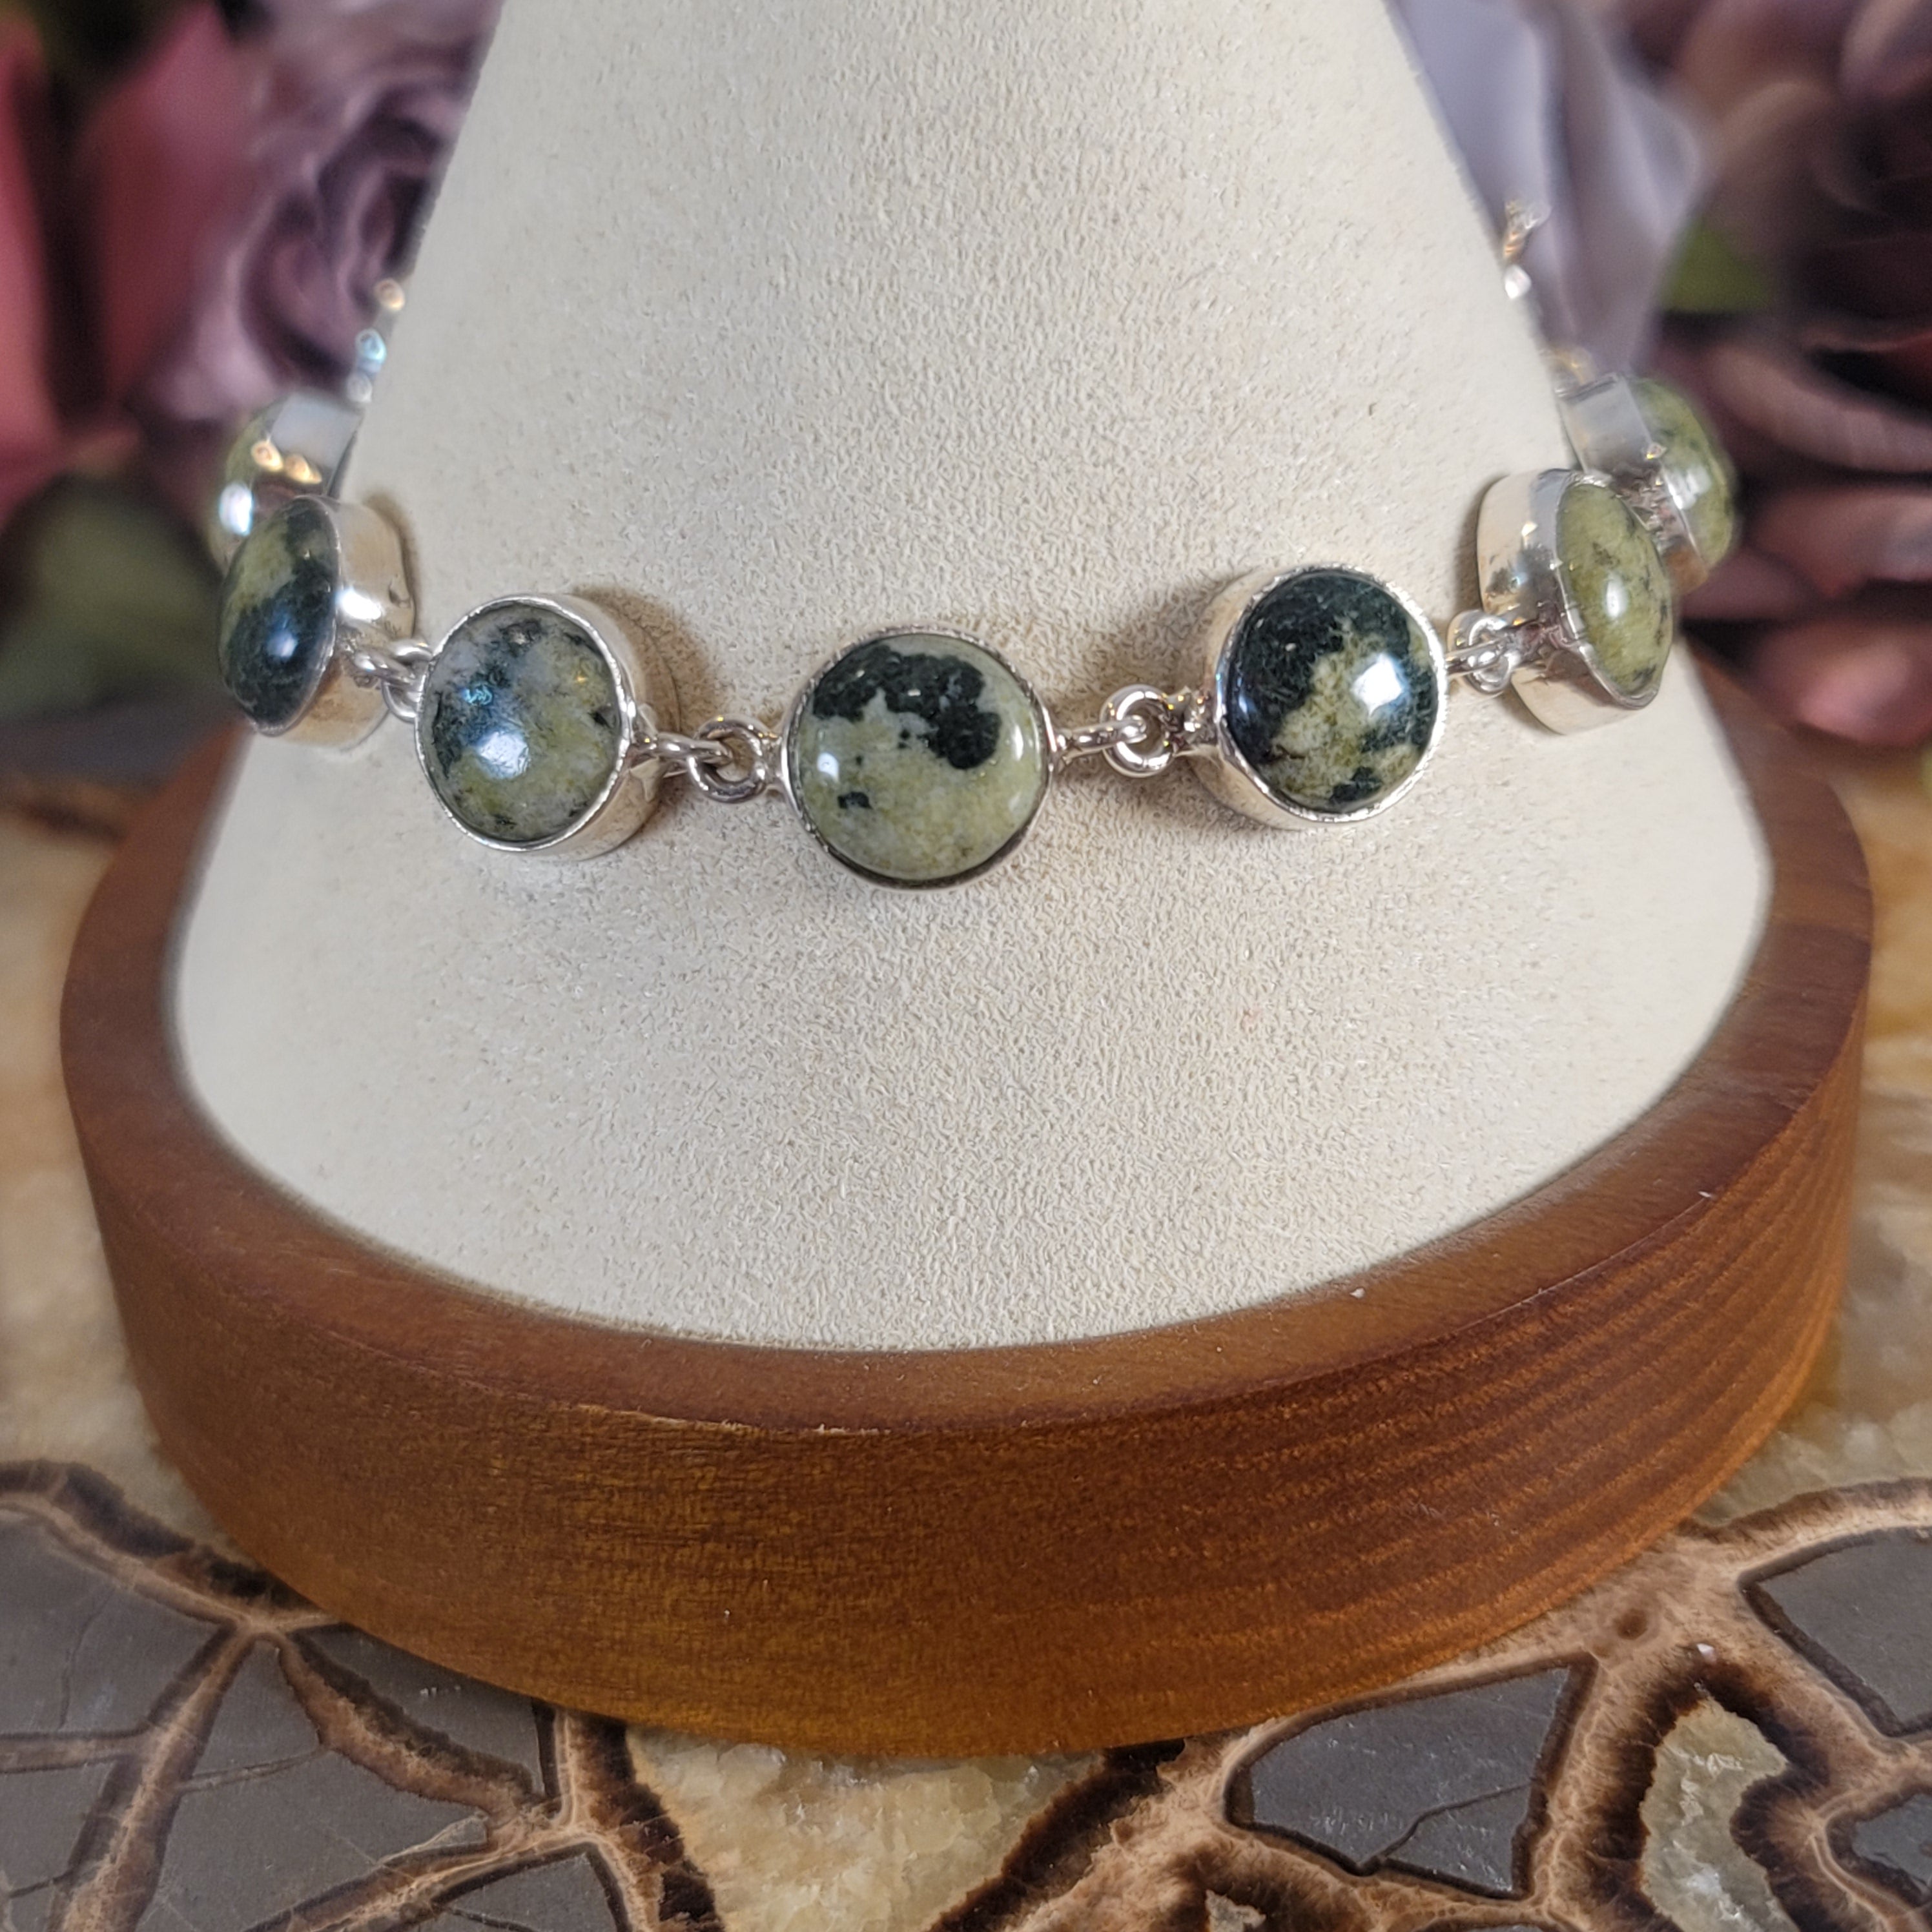 Serpentine Bracelet .925 Silver for Clearing Energy Blockages